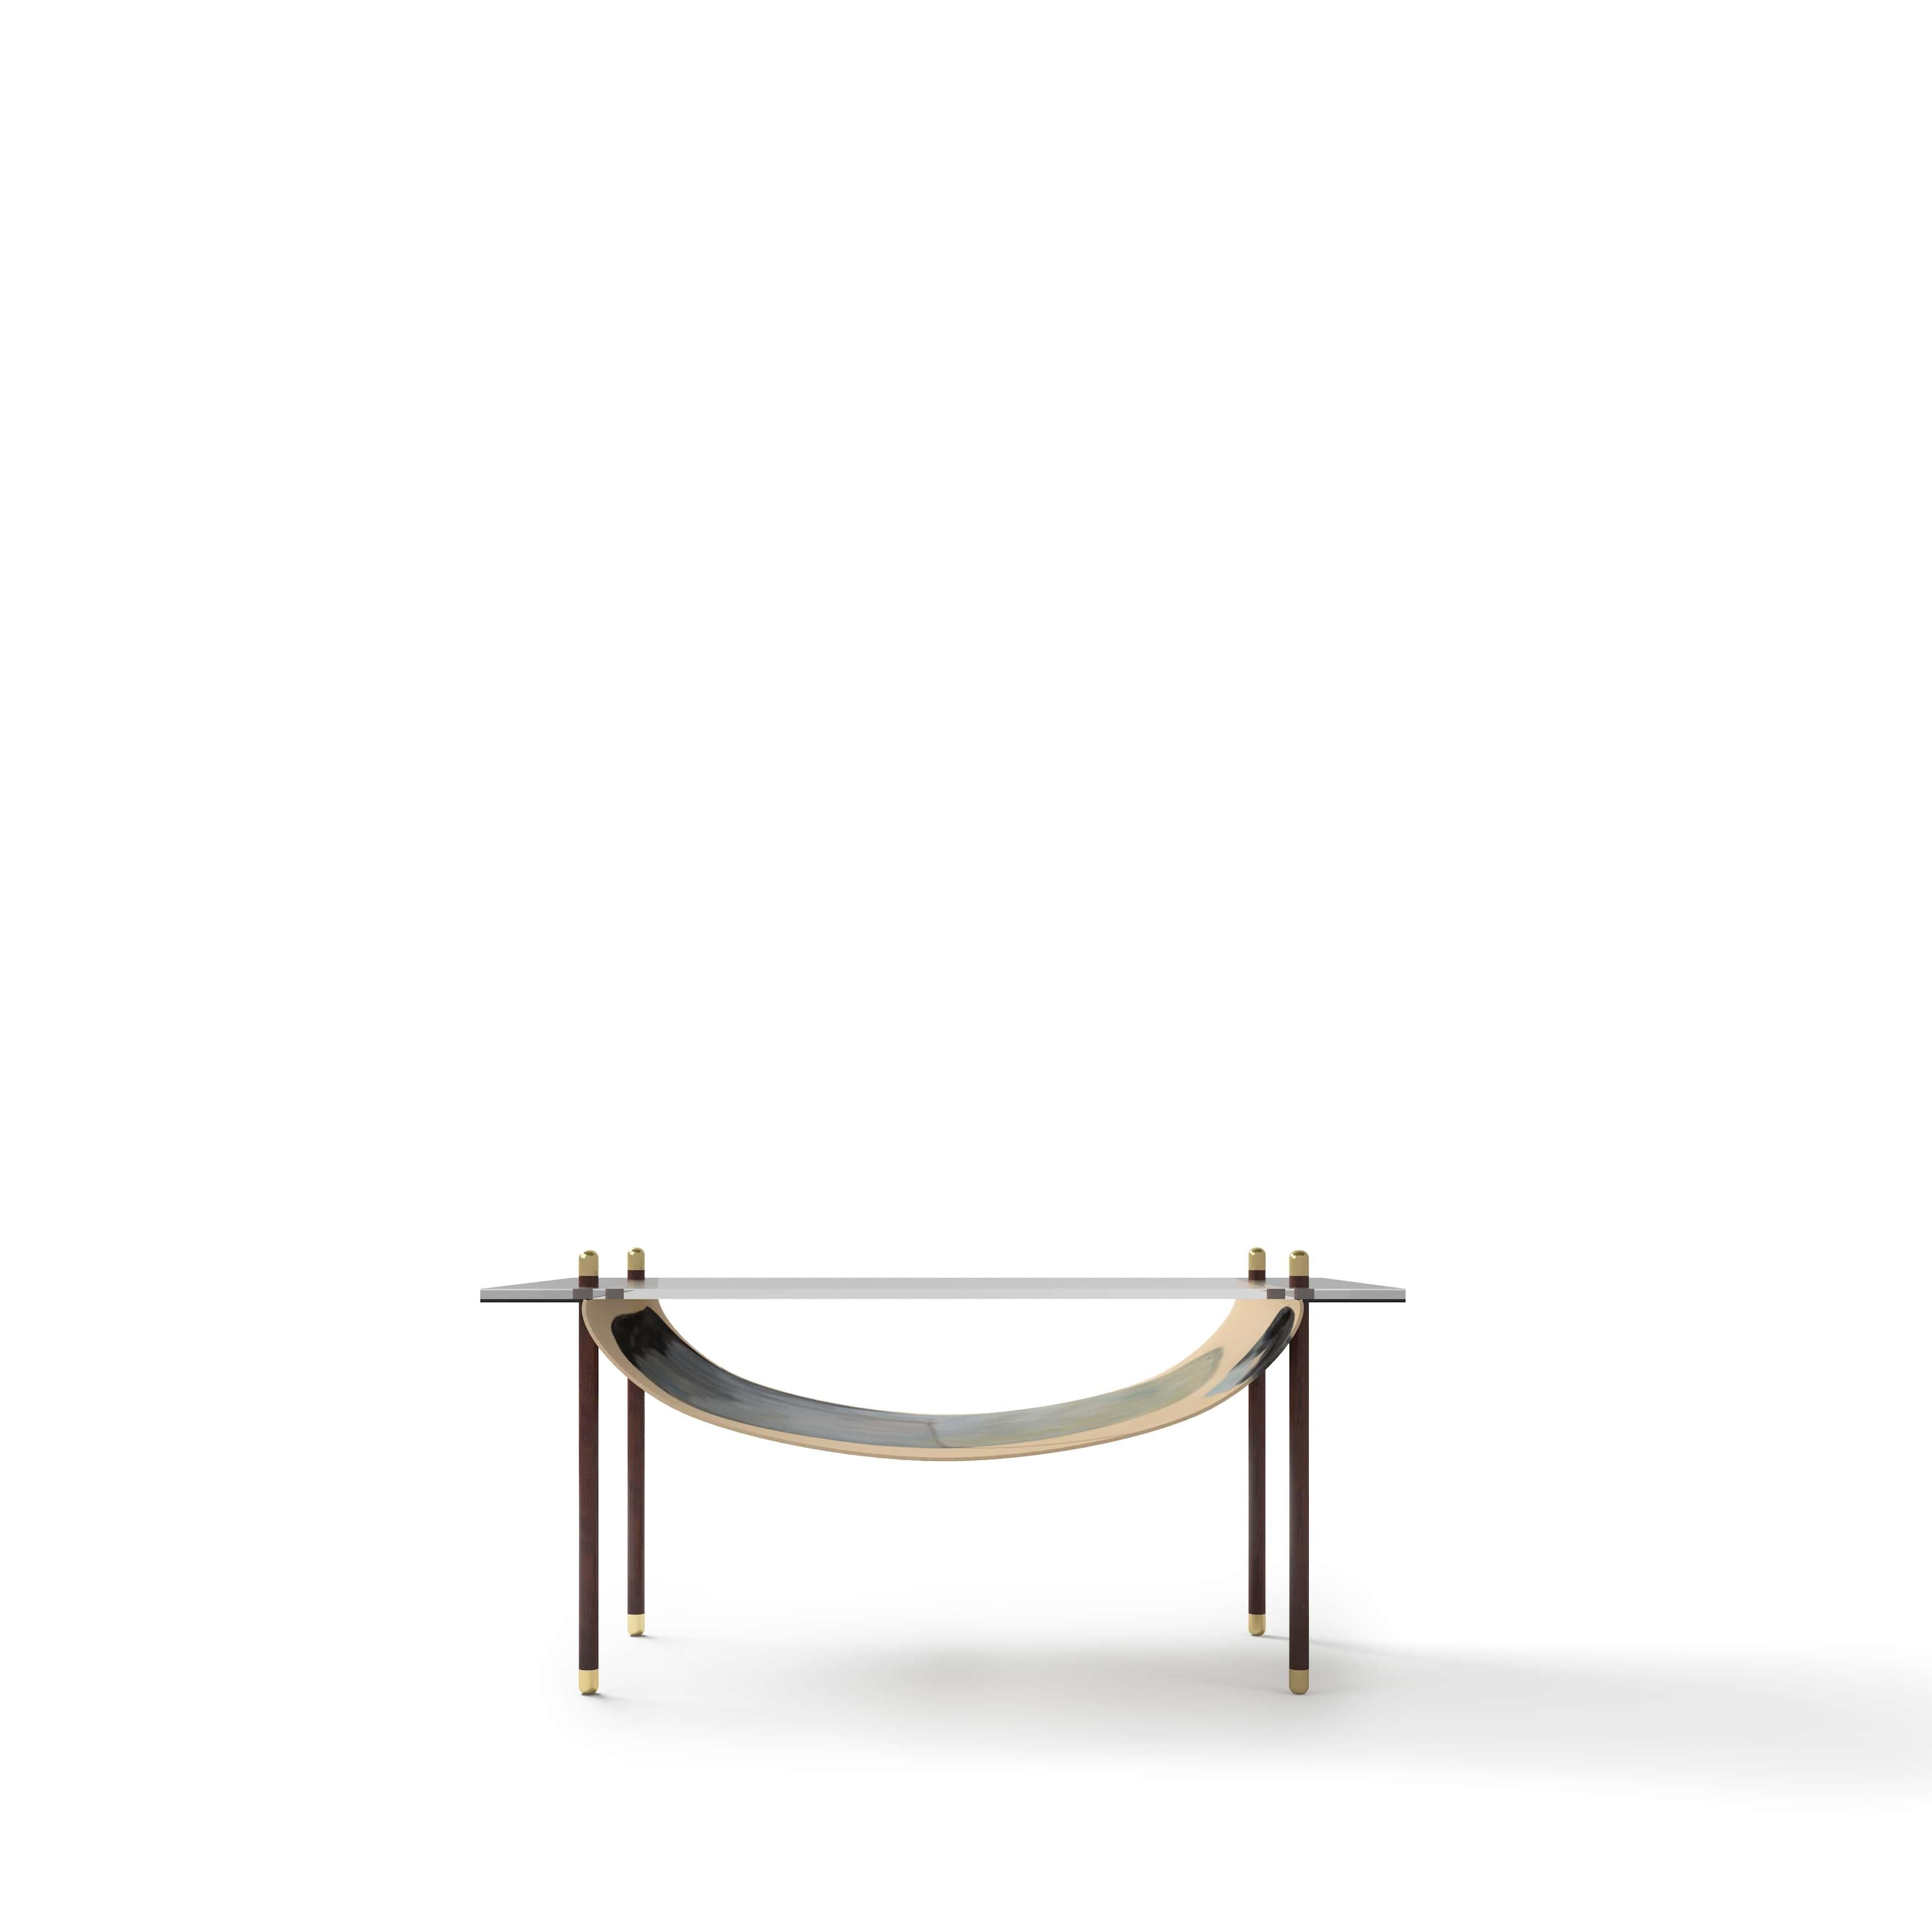 Brooklyn takes its inspiration from the iconic Brooklyn bridge - hybrid suspension bridge in New York City, which is one of the first and largest bridges built of steel. Brooklyn coffee table consists of two support bases: an upper glass base, and a